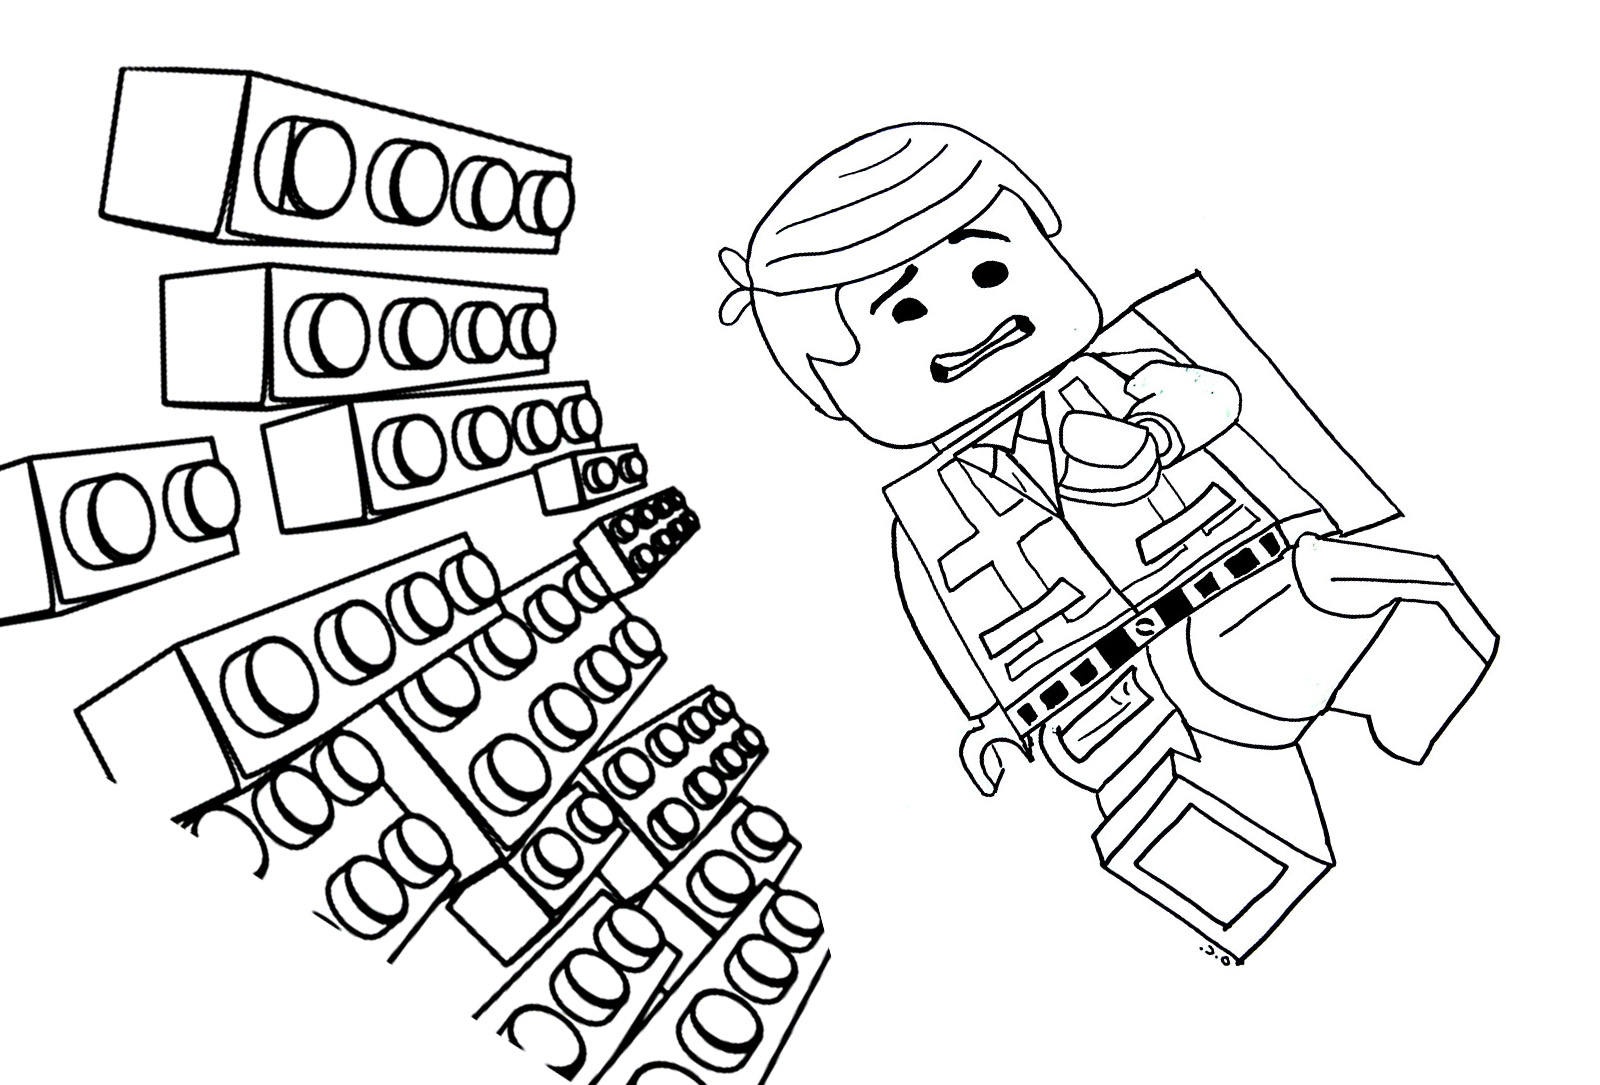 Image of the great lego adventure to download and color